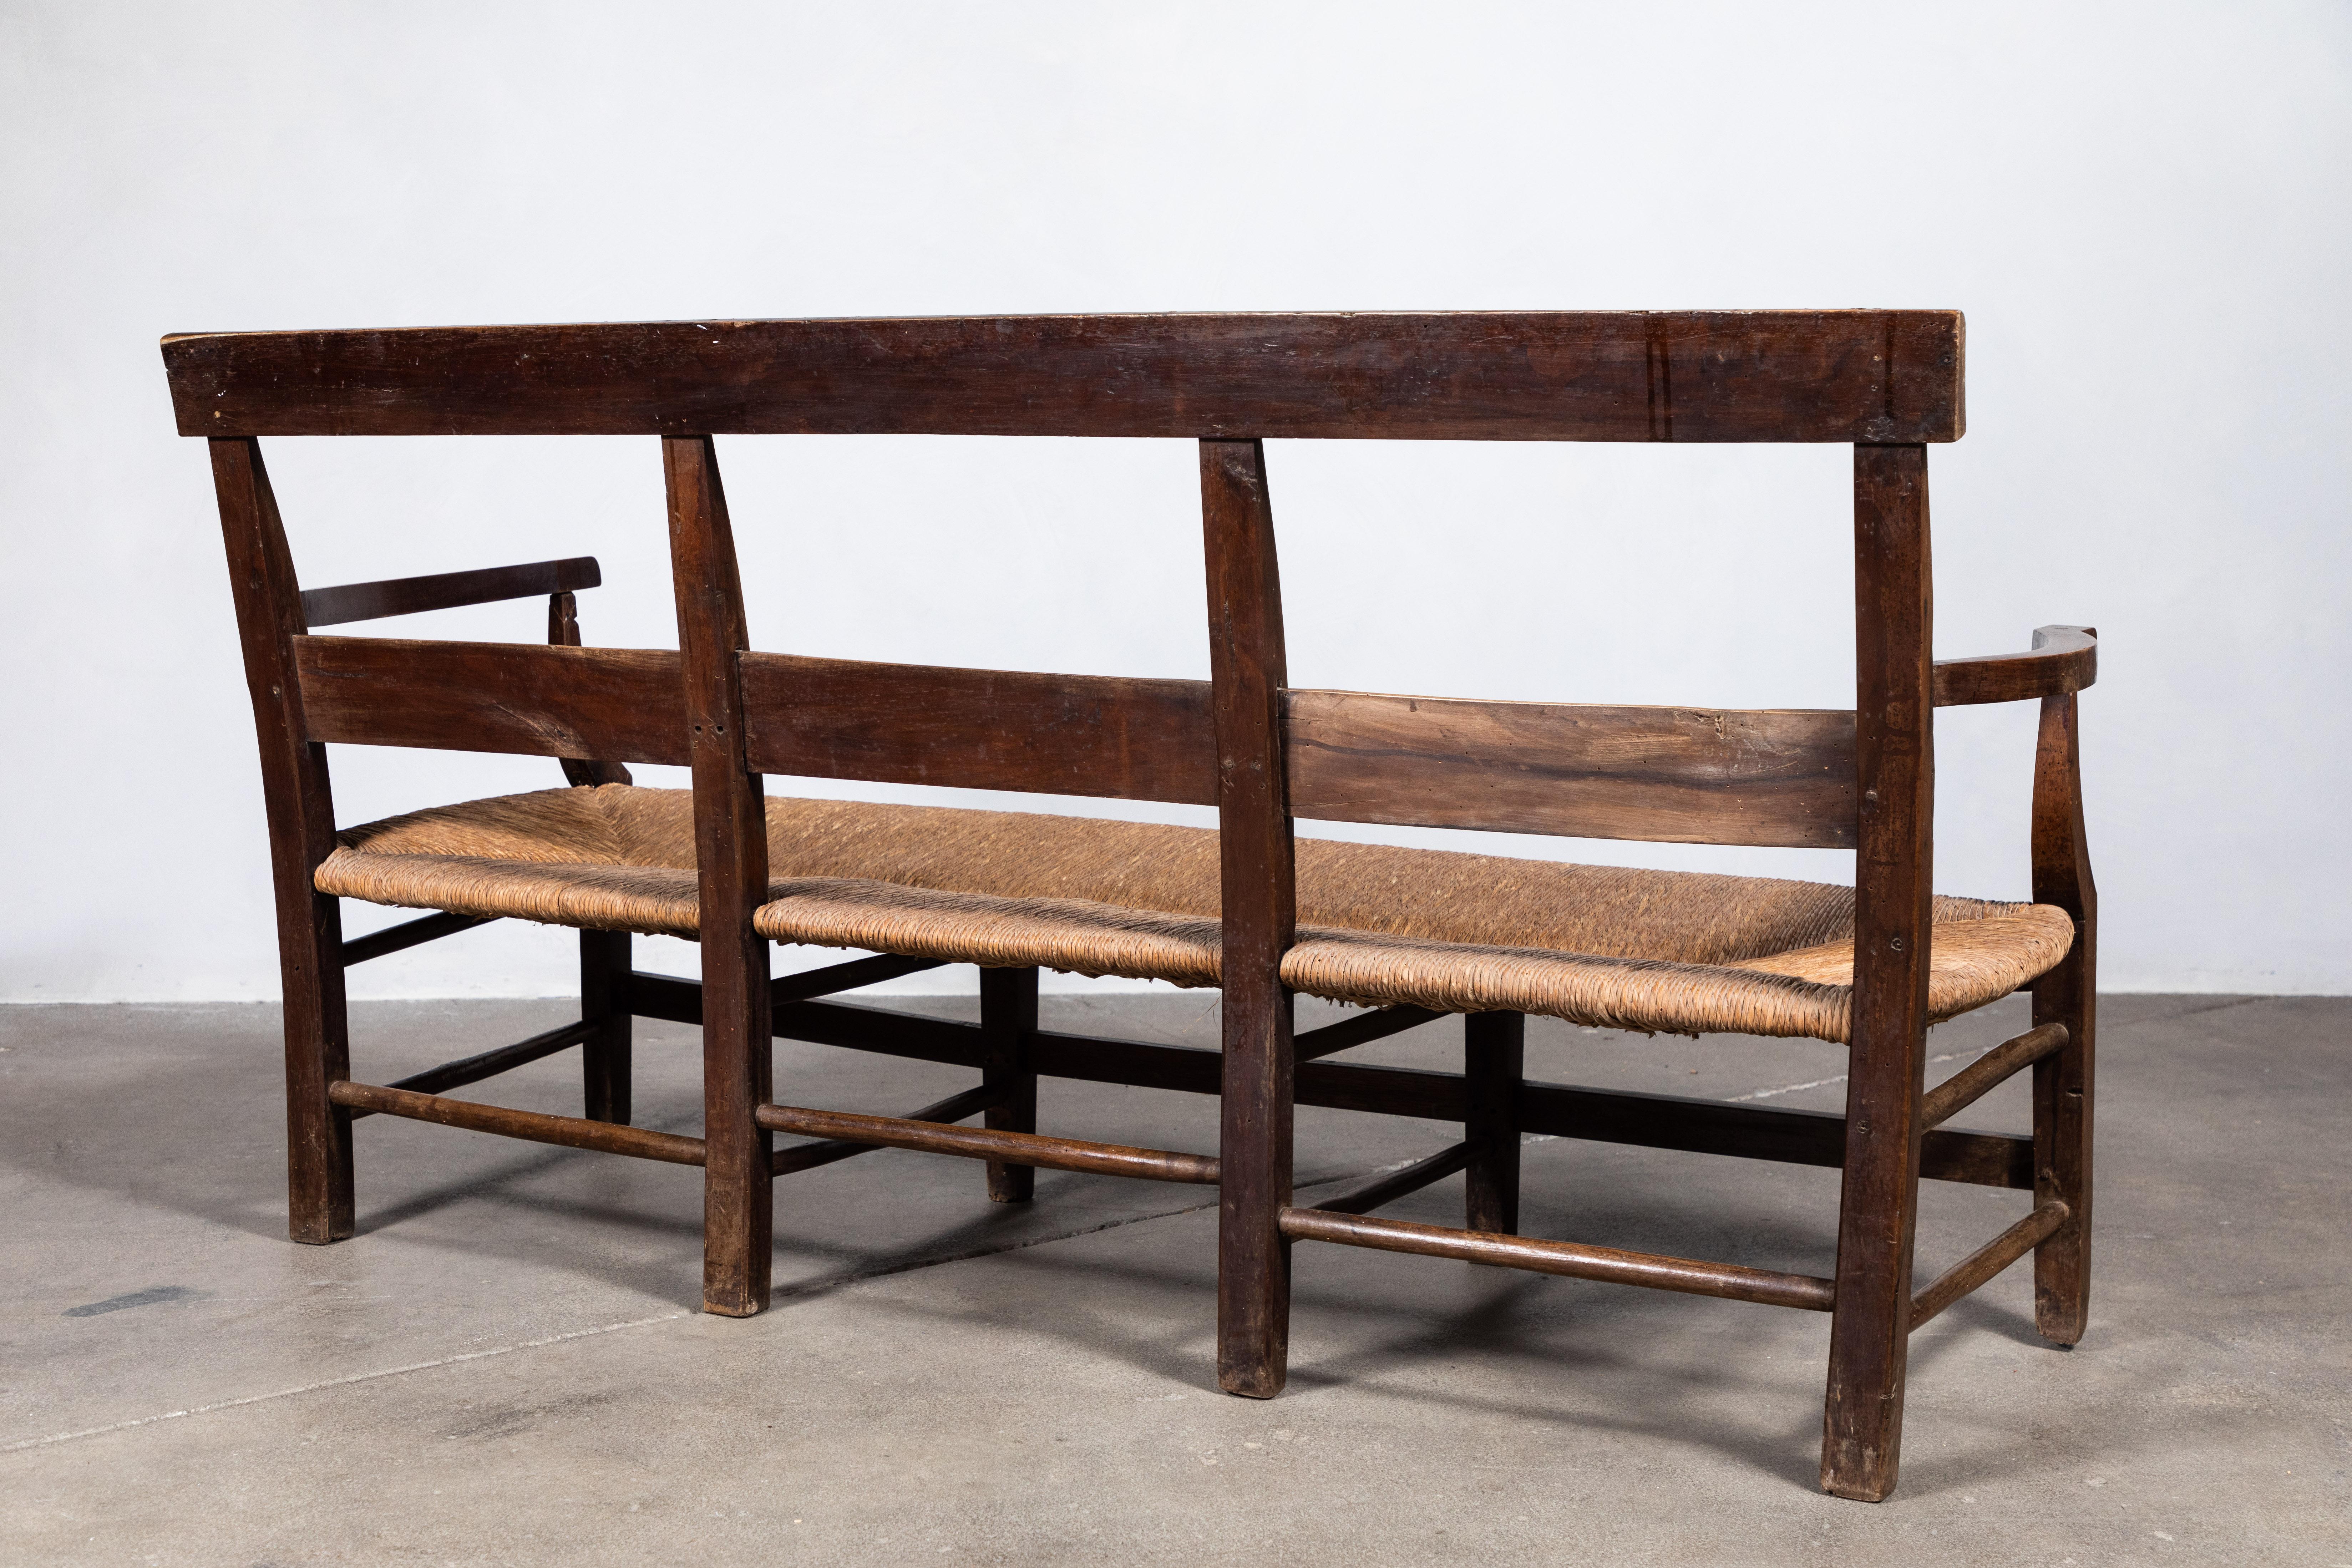 Mid-20th Century French Rustic Rush Seat Ladder Back Bench